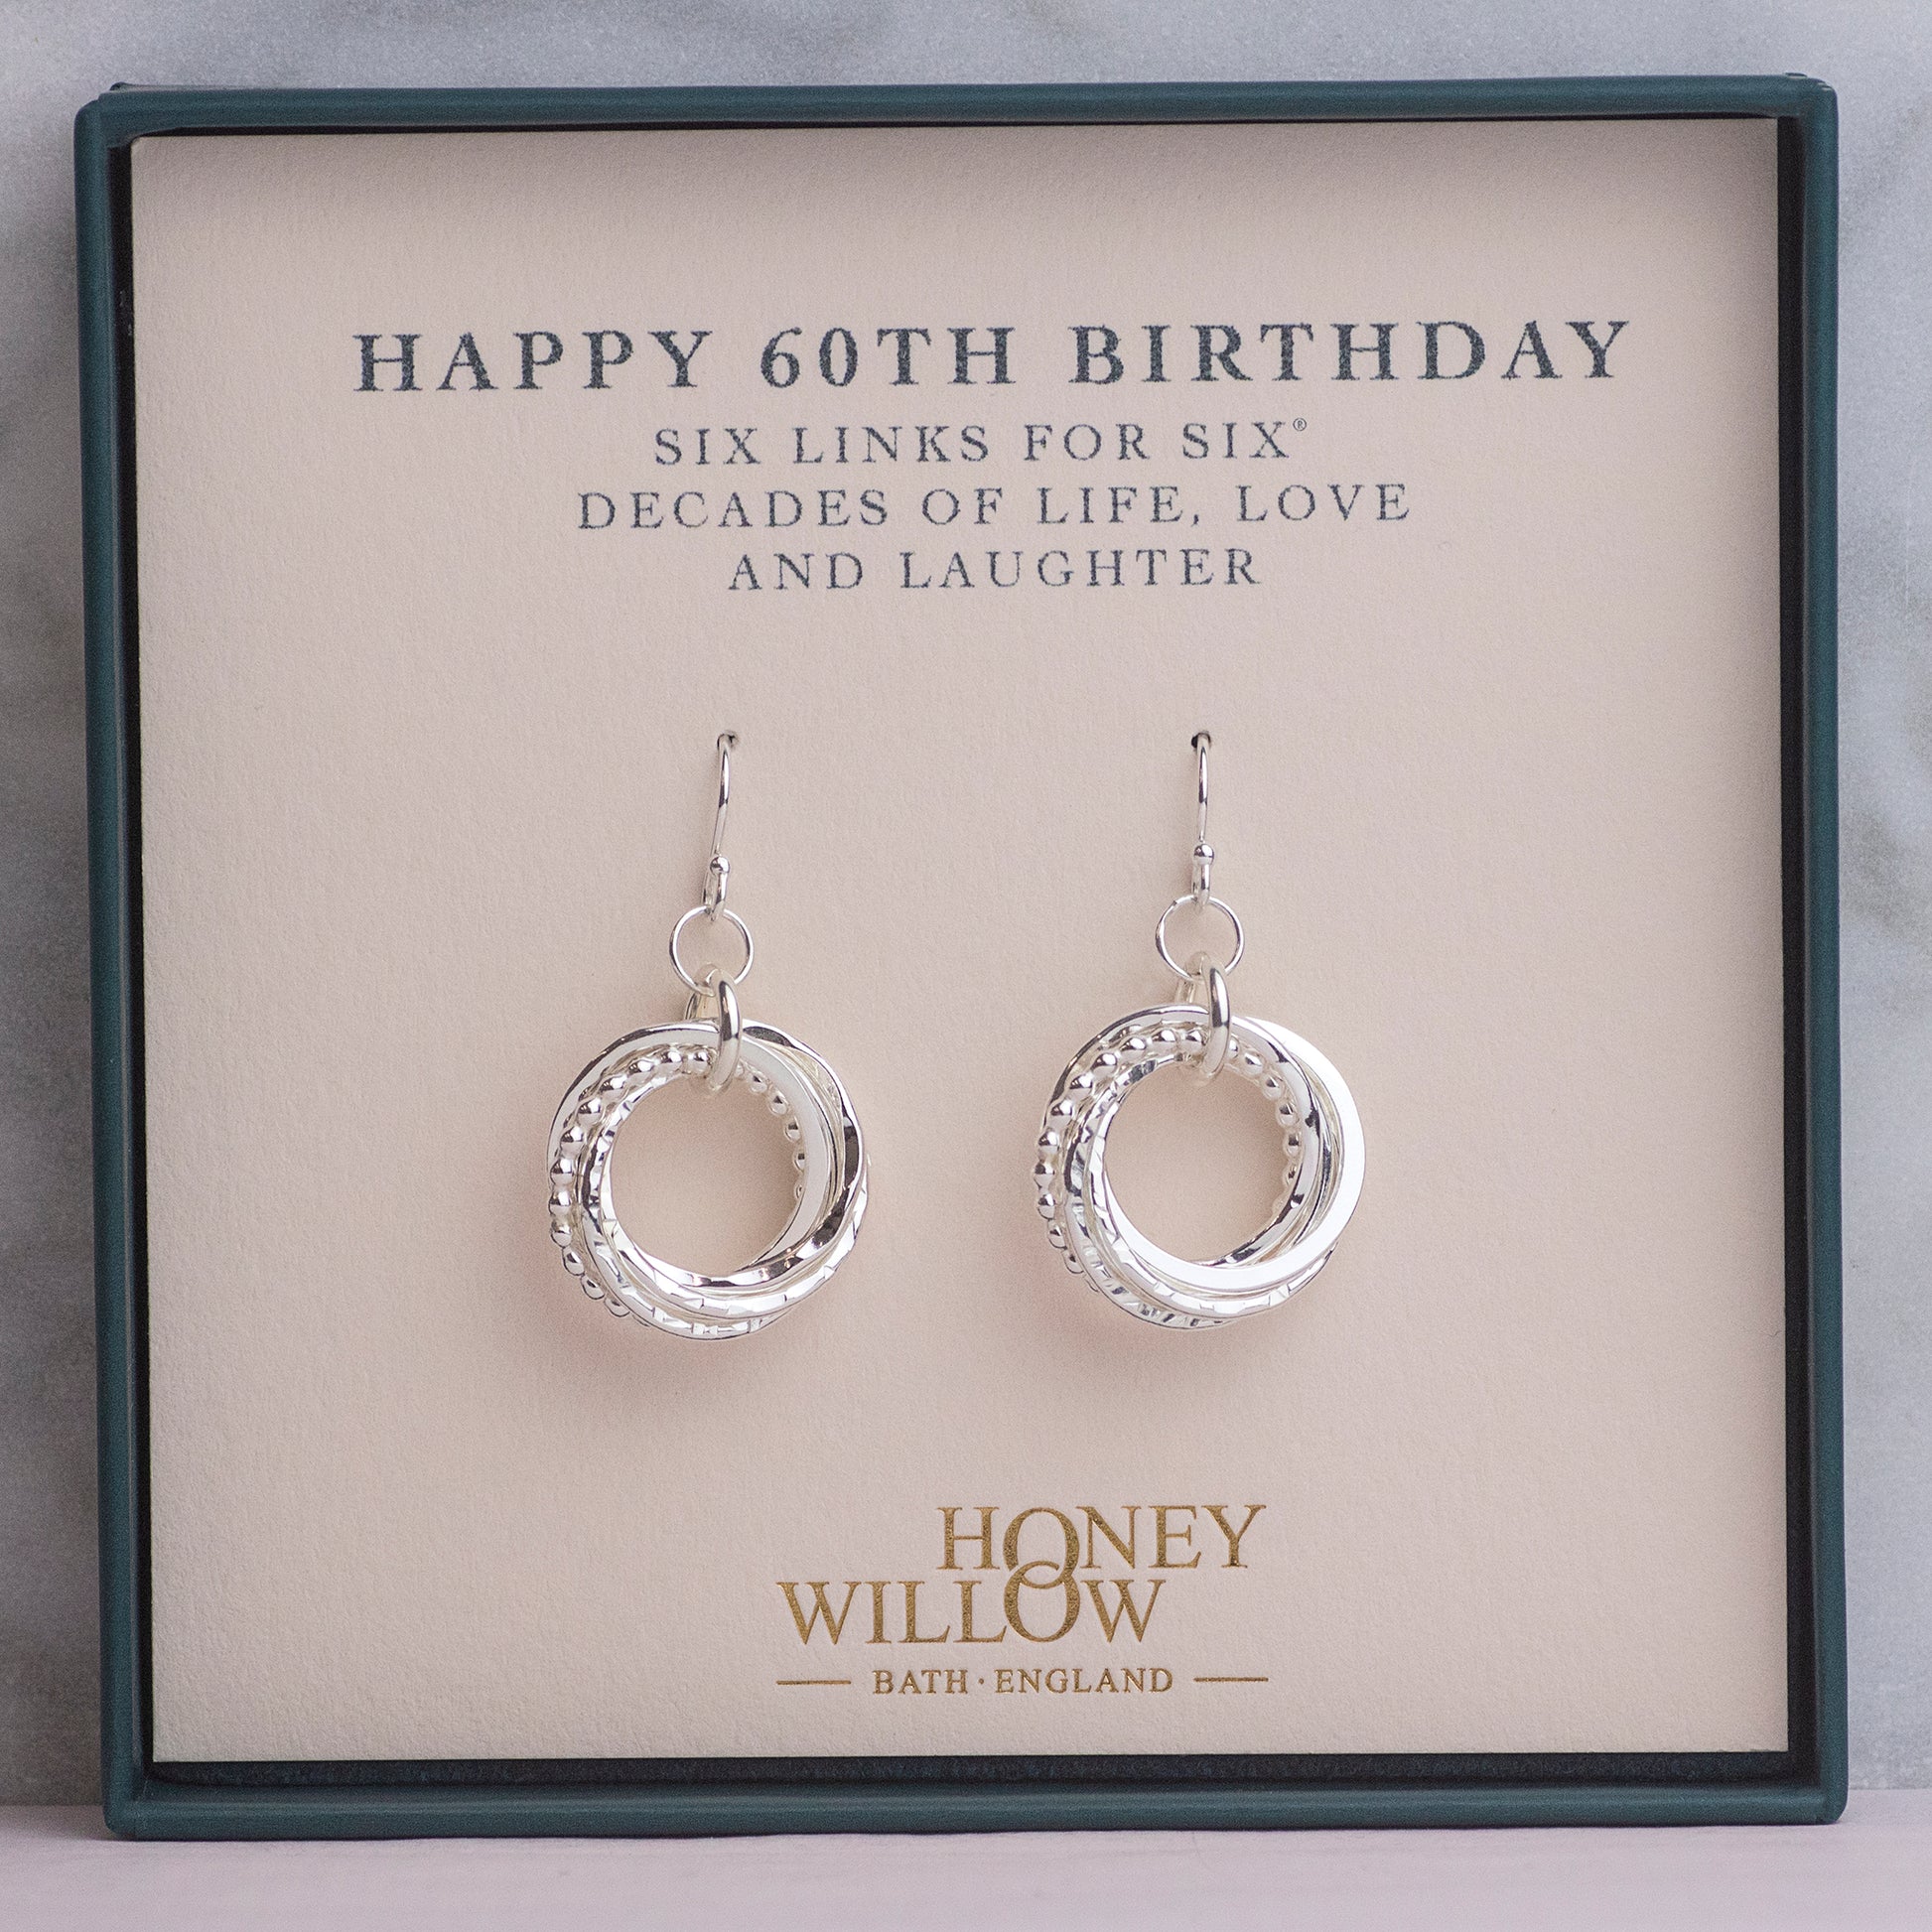 60th Birthday Earrings - The Original 6 Links for 6 Decades Earrings - Petite Silver